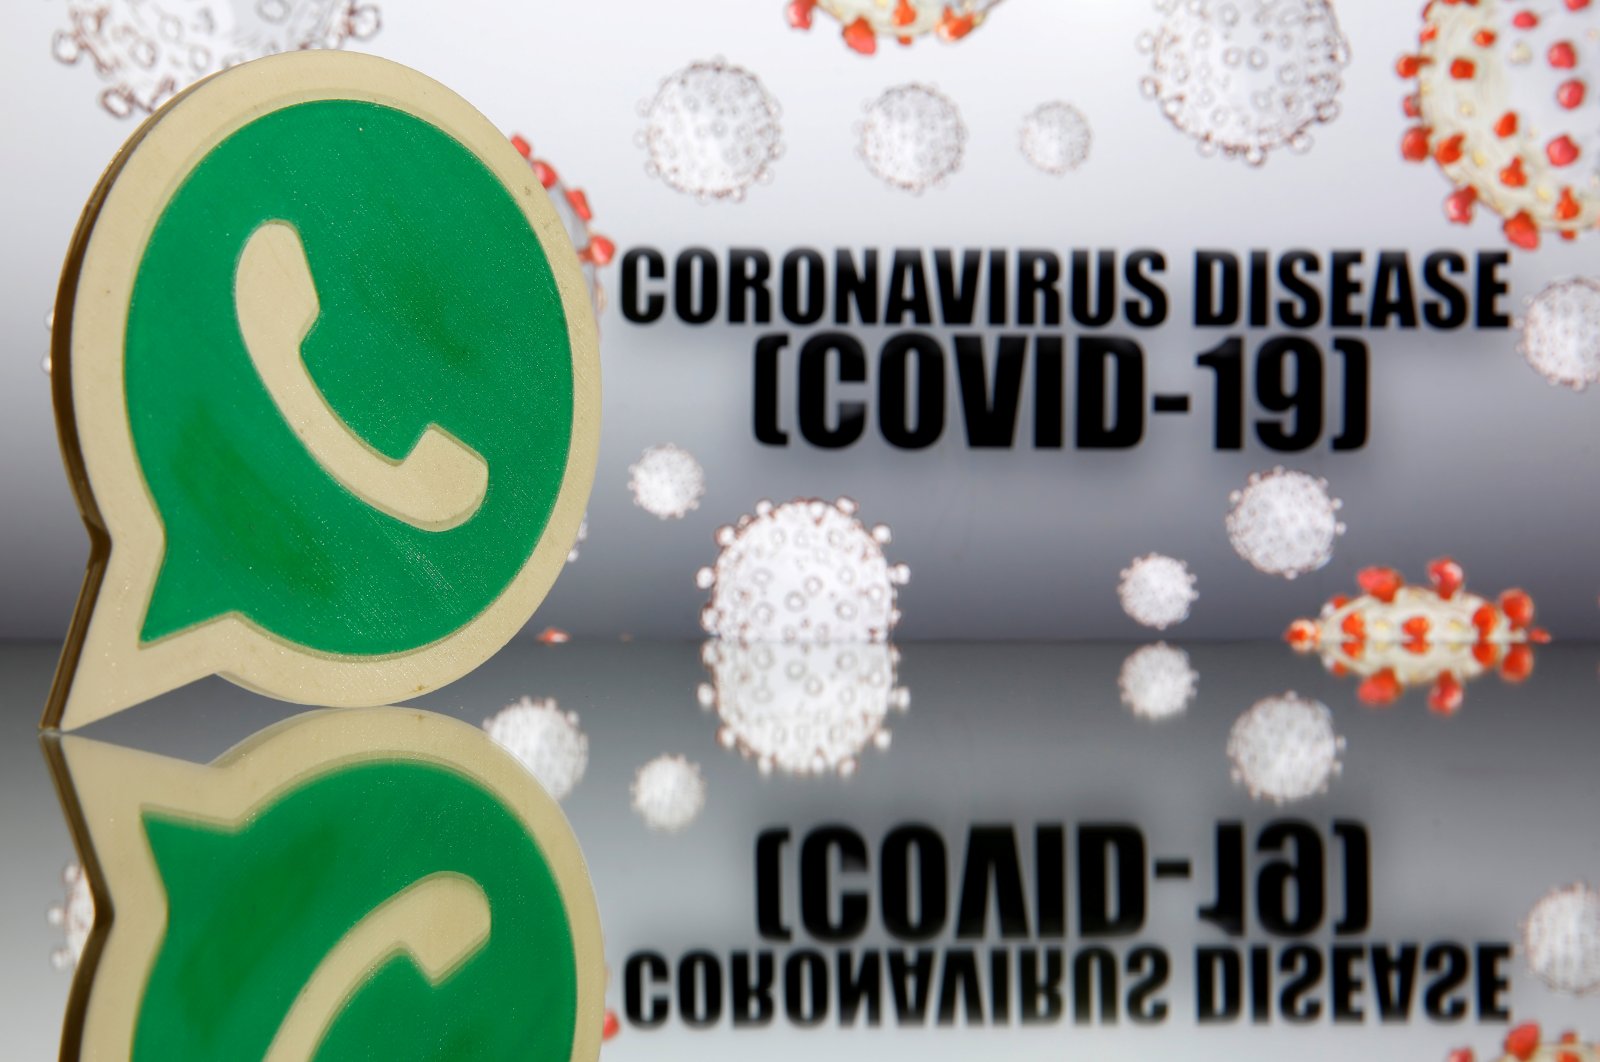 A 3D-printed Whatsapp logo embellishes a coronavirus disease (COVID-19) sign in this illustration from March 19, 2020. (Reuters Photo)